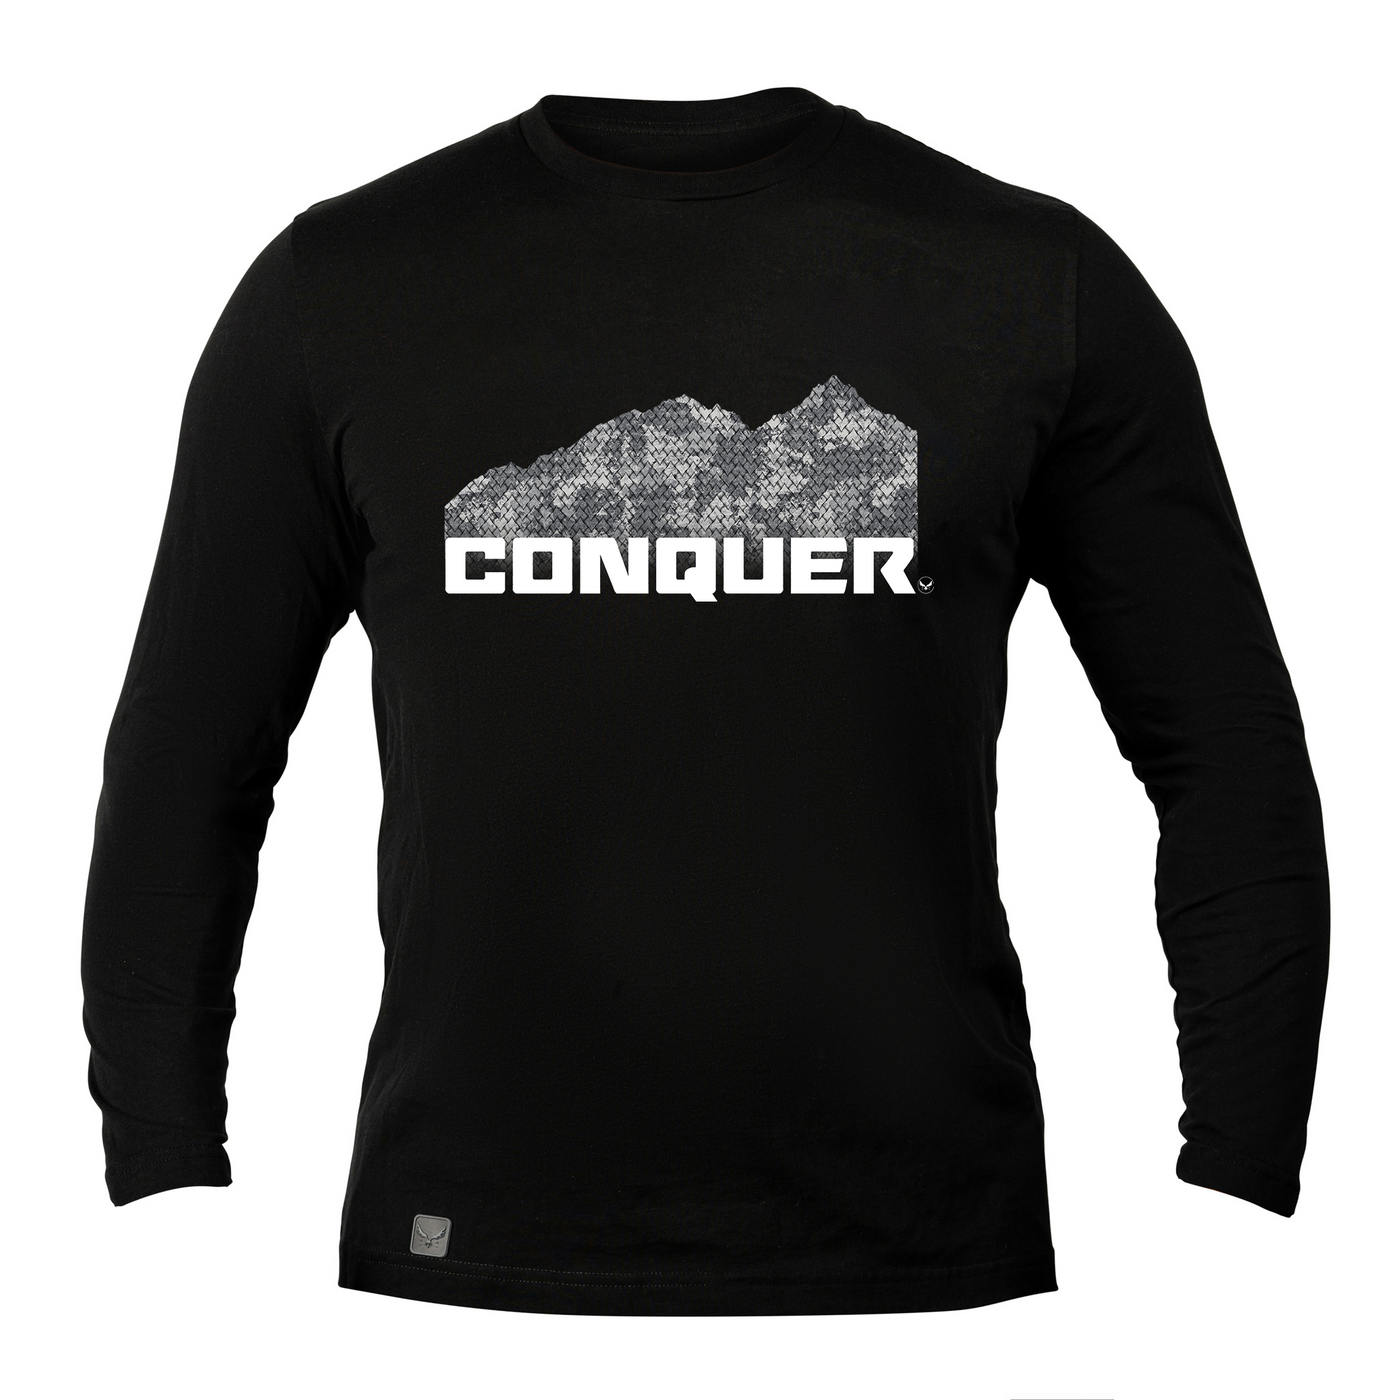 CONQUER Long Sleeve Poly Cotton Unisex Shirt - Made in USA